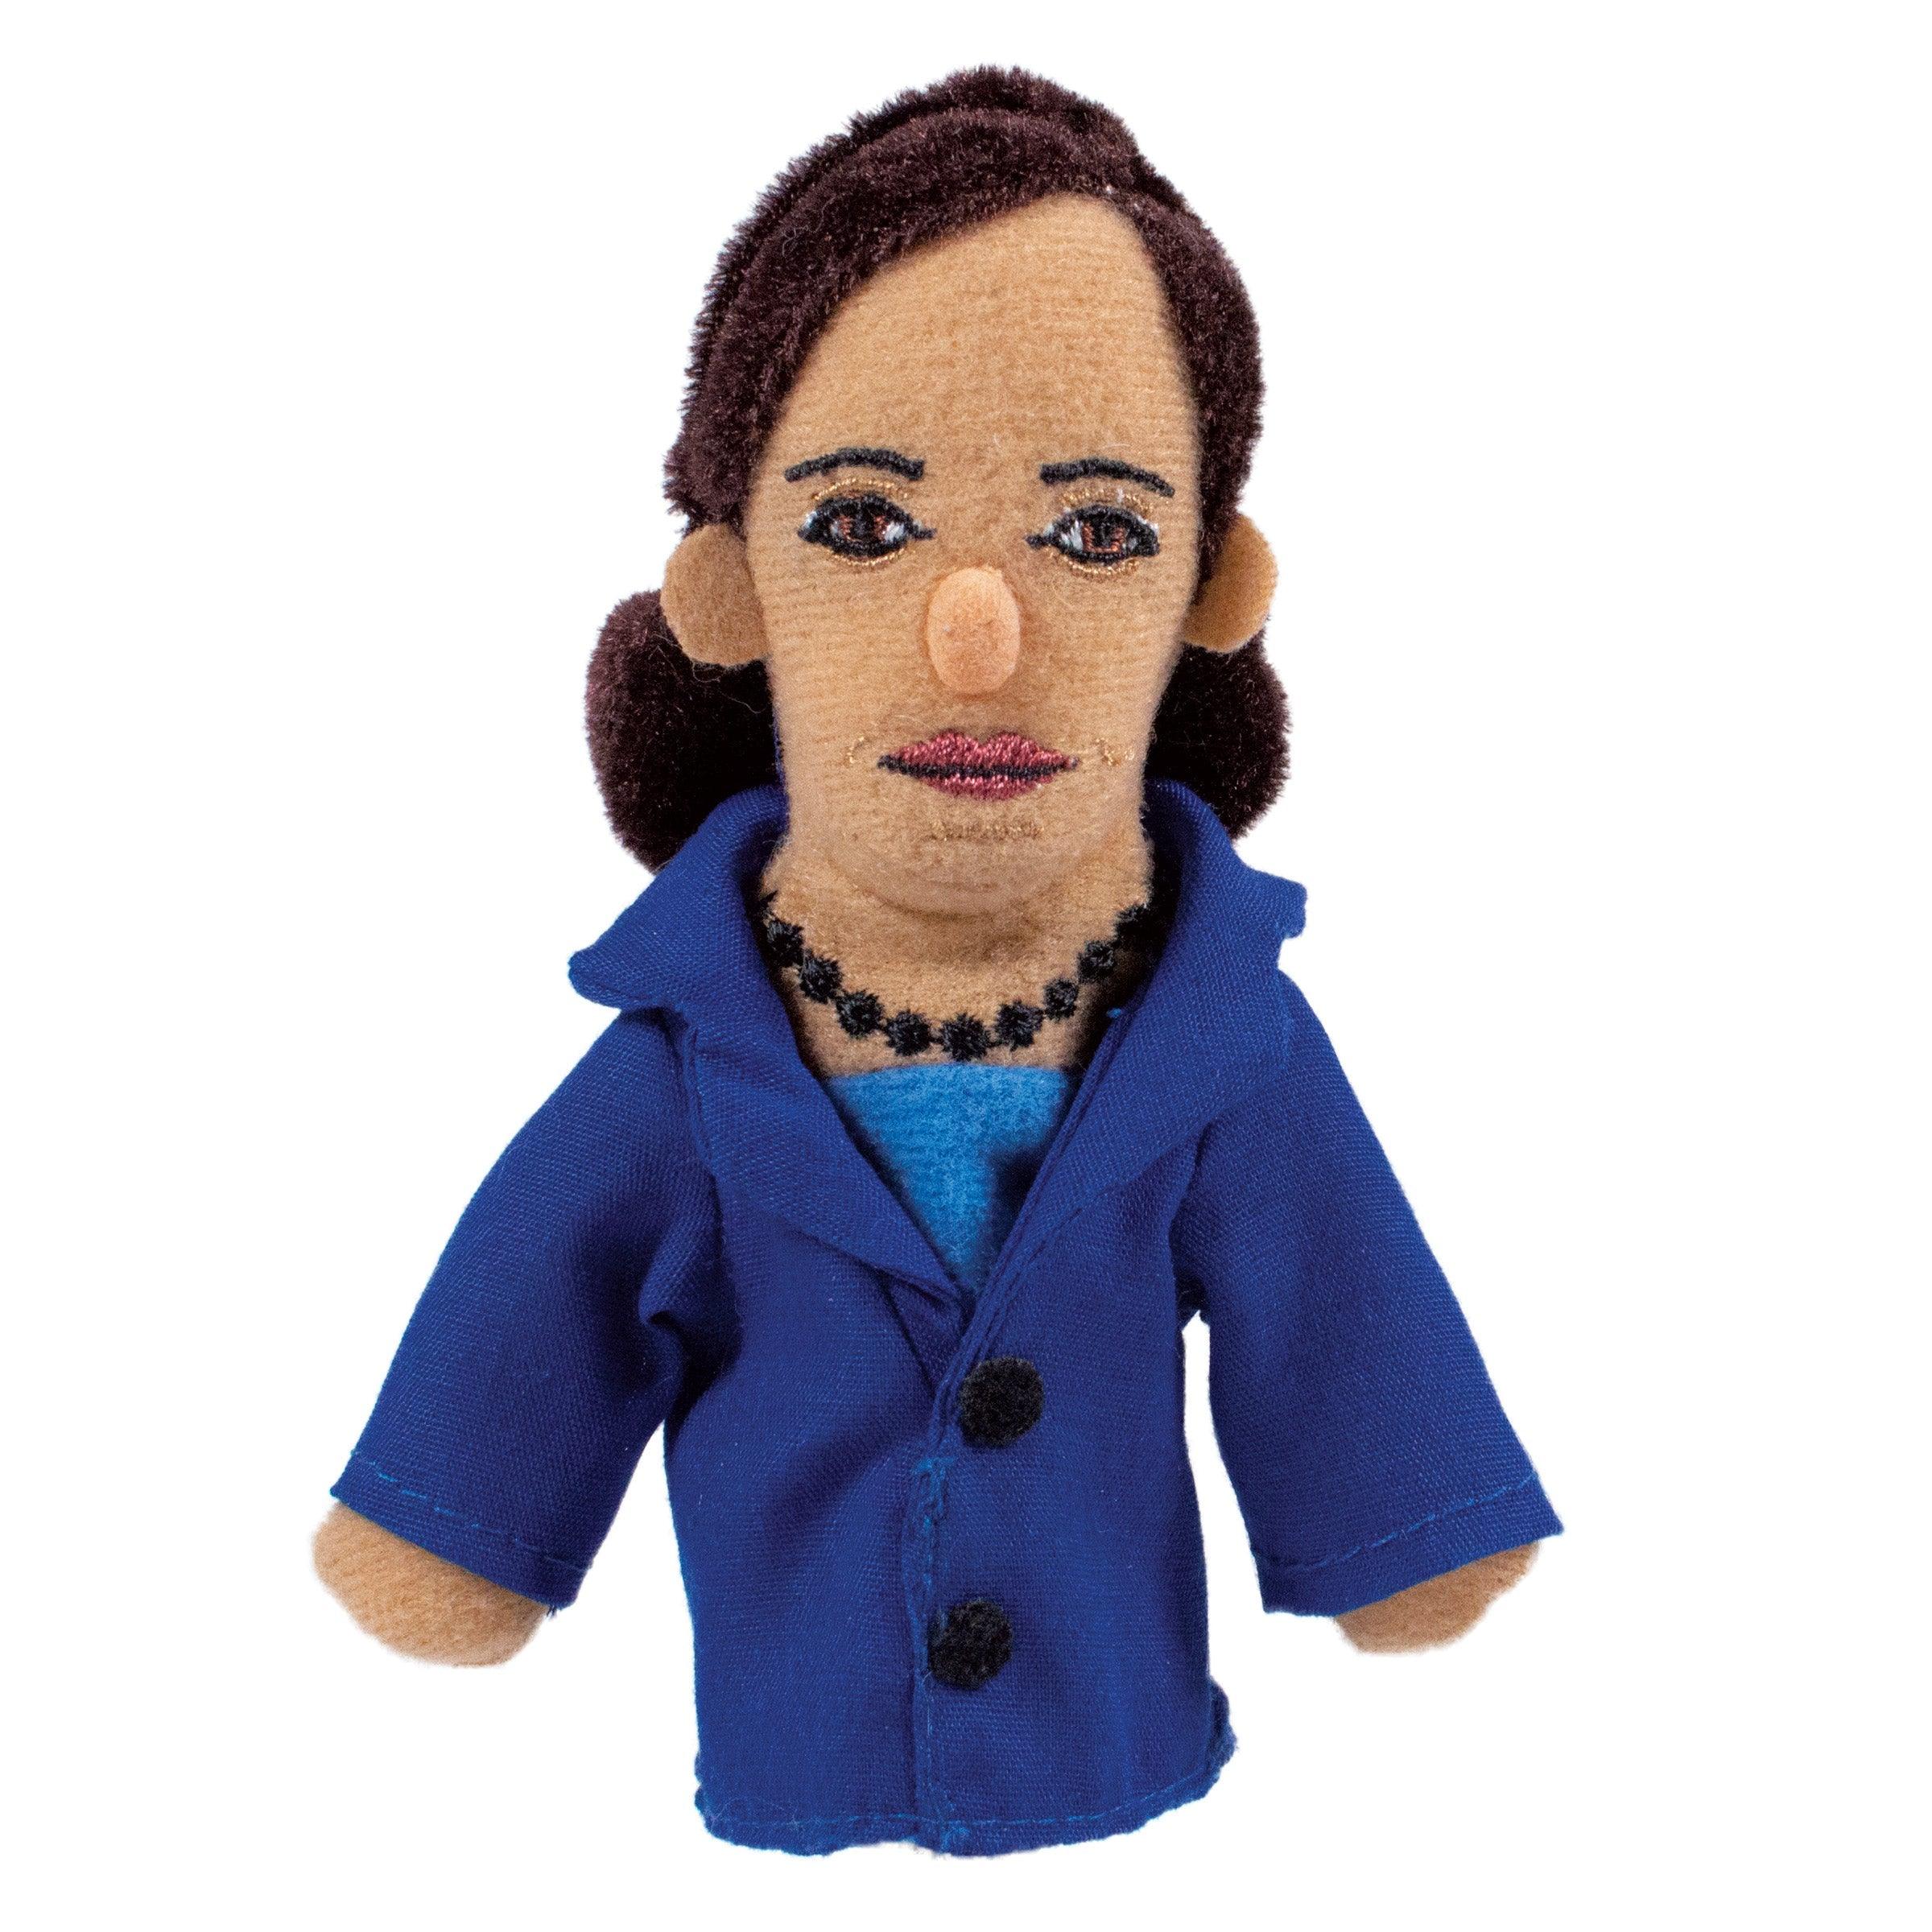 Product photo of Kamala Harris Finger Puppet, a novelty gift manufactured by The Unemployed Philosophers Guild.